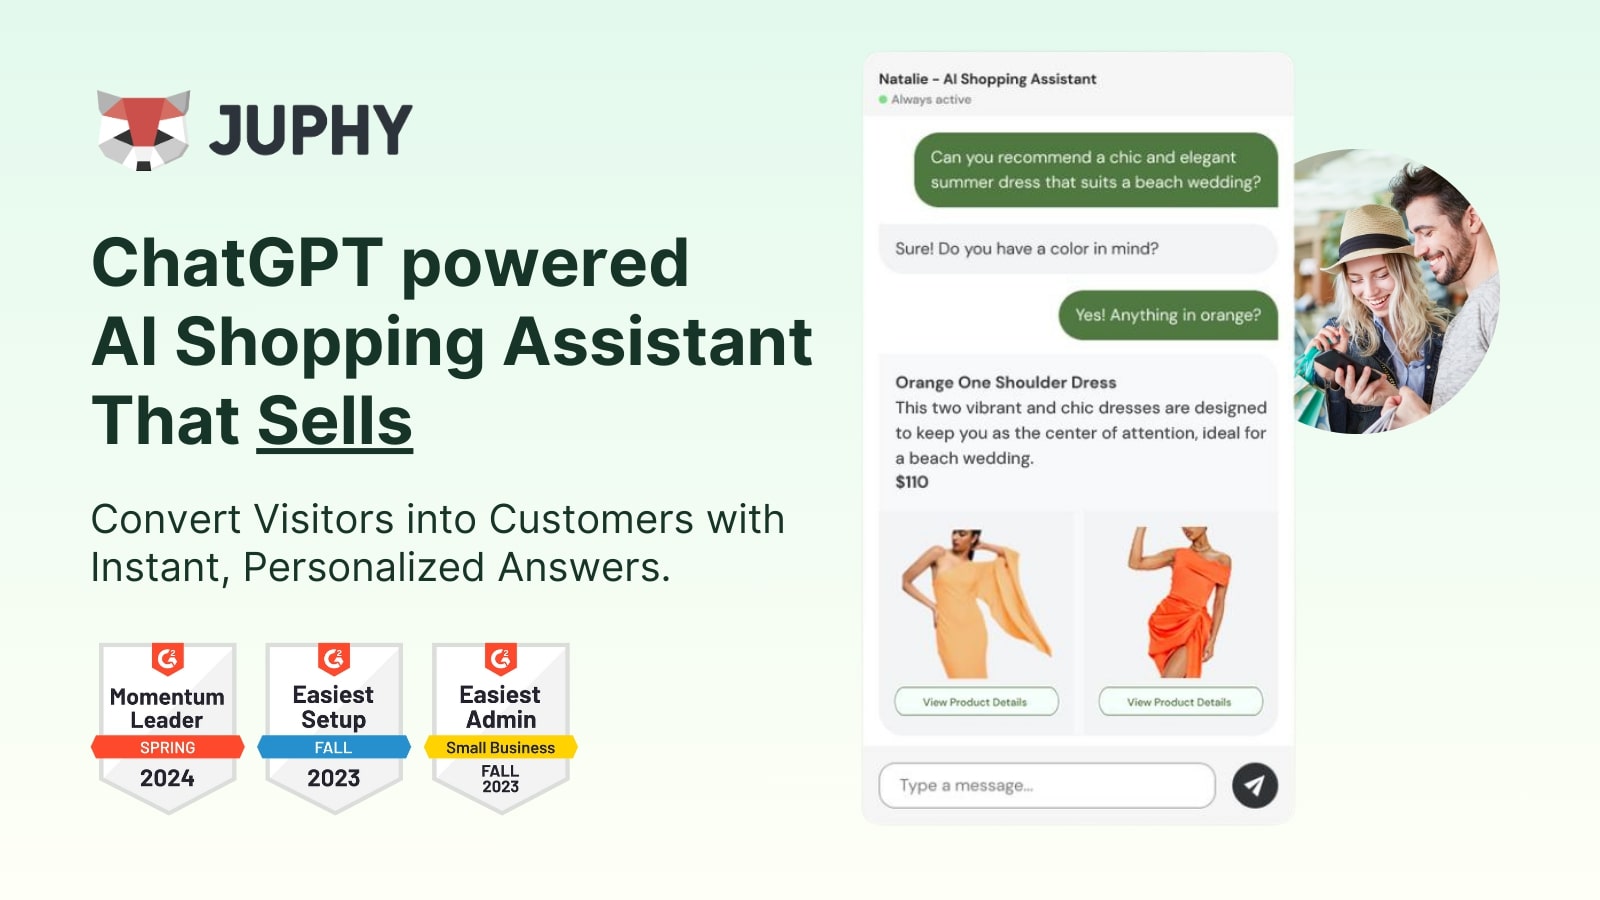 Integrate Juphy AI with Shopify to extend business hours and capture sales 24/7.